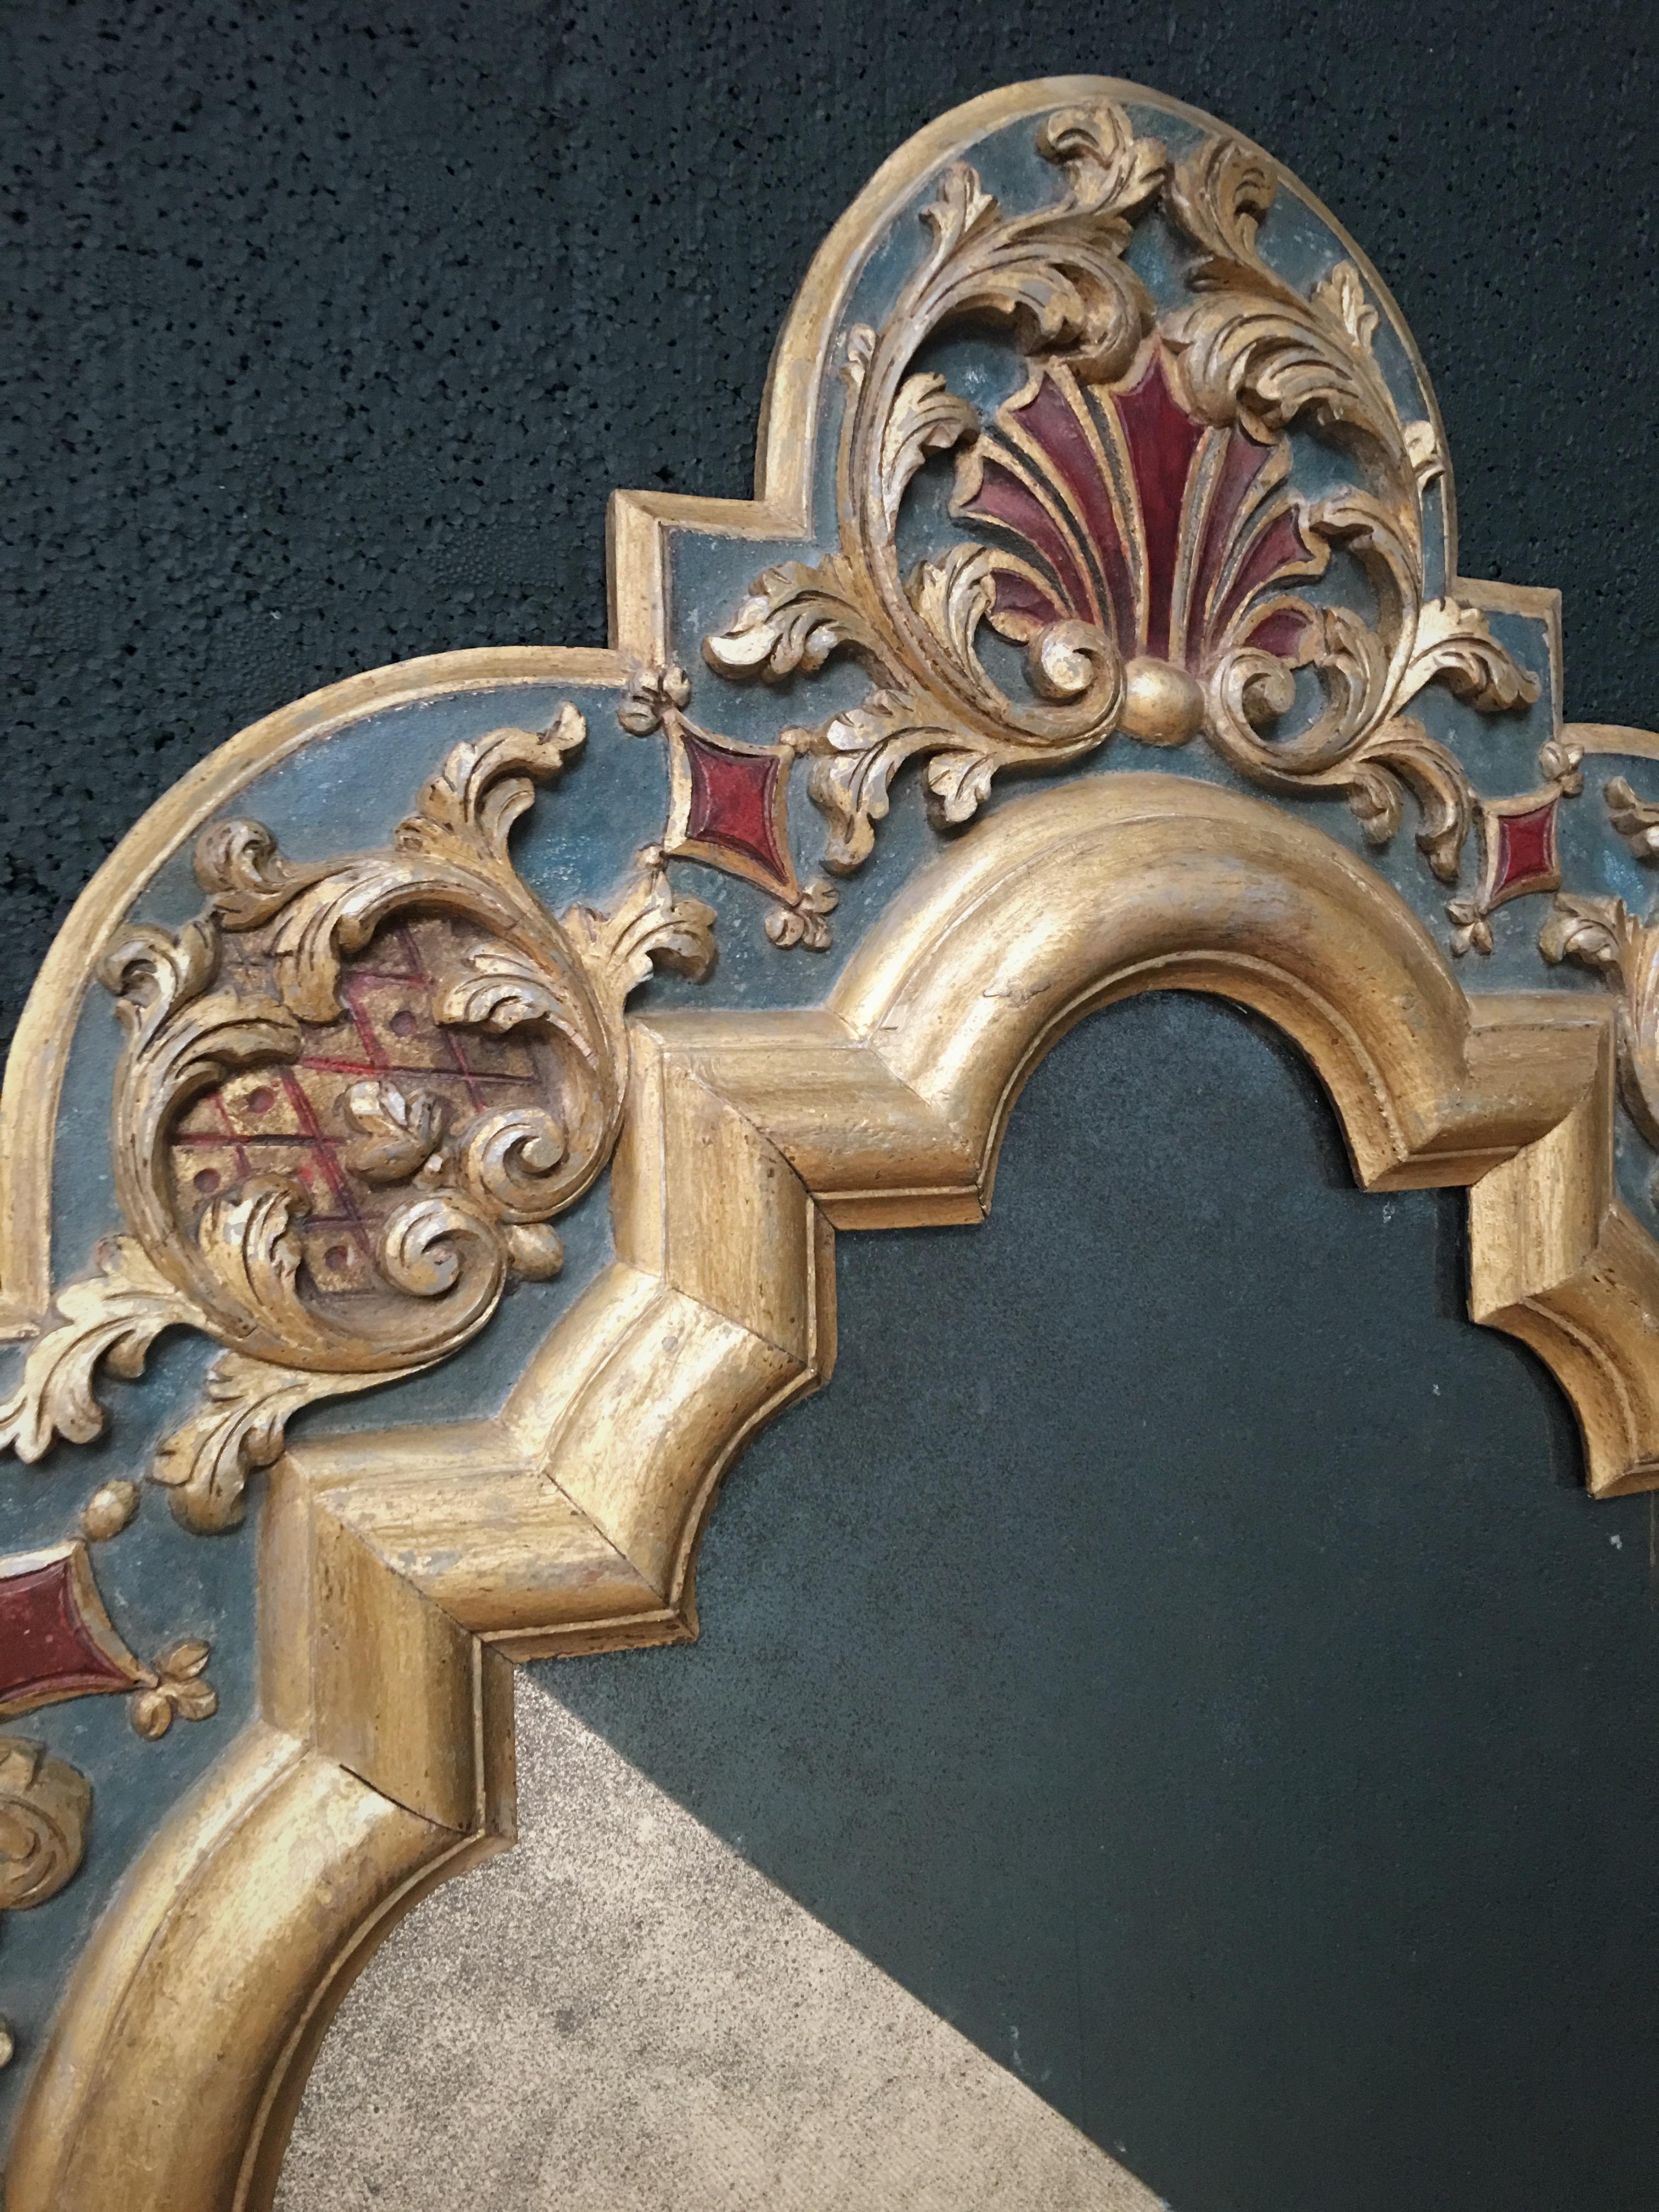 An exceptionally rare, early 19th century carved wood Gothic style mirror, possibly continental. Our restoration team have carefully dry scraped the mirror to remove over-layers, revealing a highly decorative original painted sand-work and oil